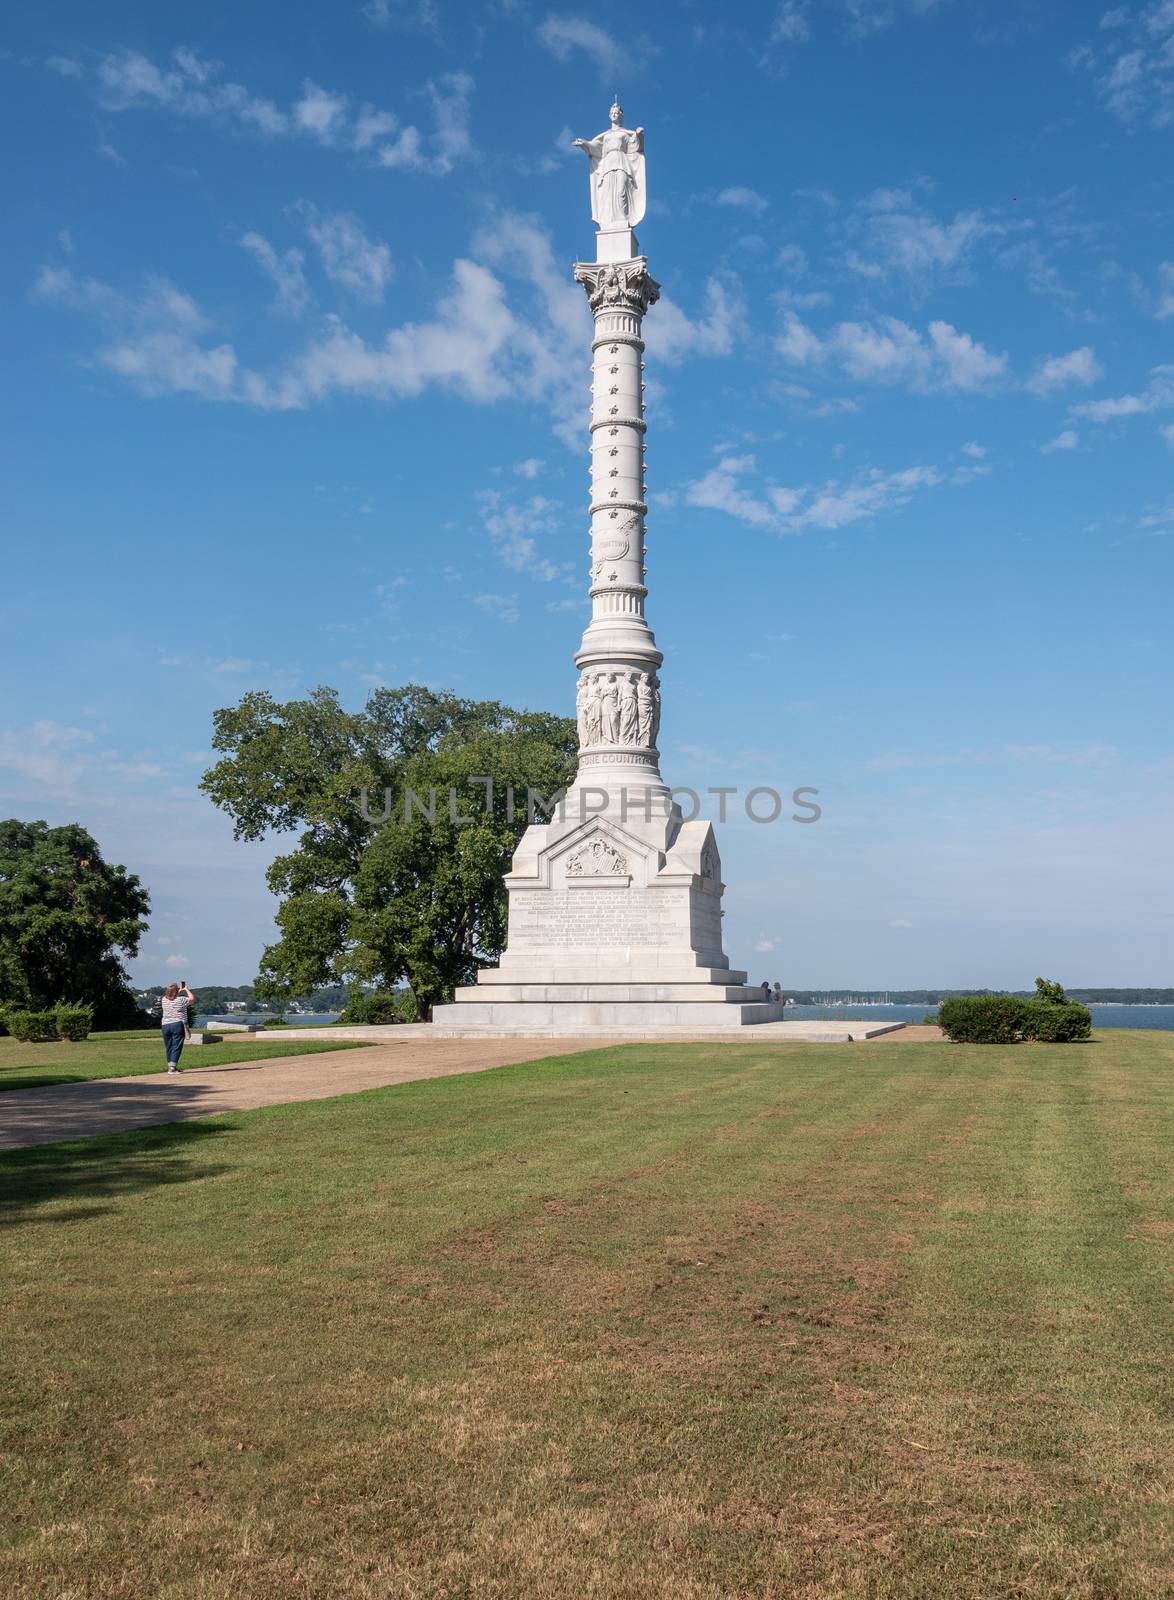 Victory Monument at Yorktown in Virginia as part of War of Independence by steheap